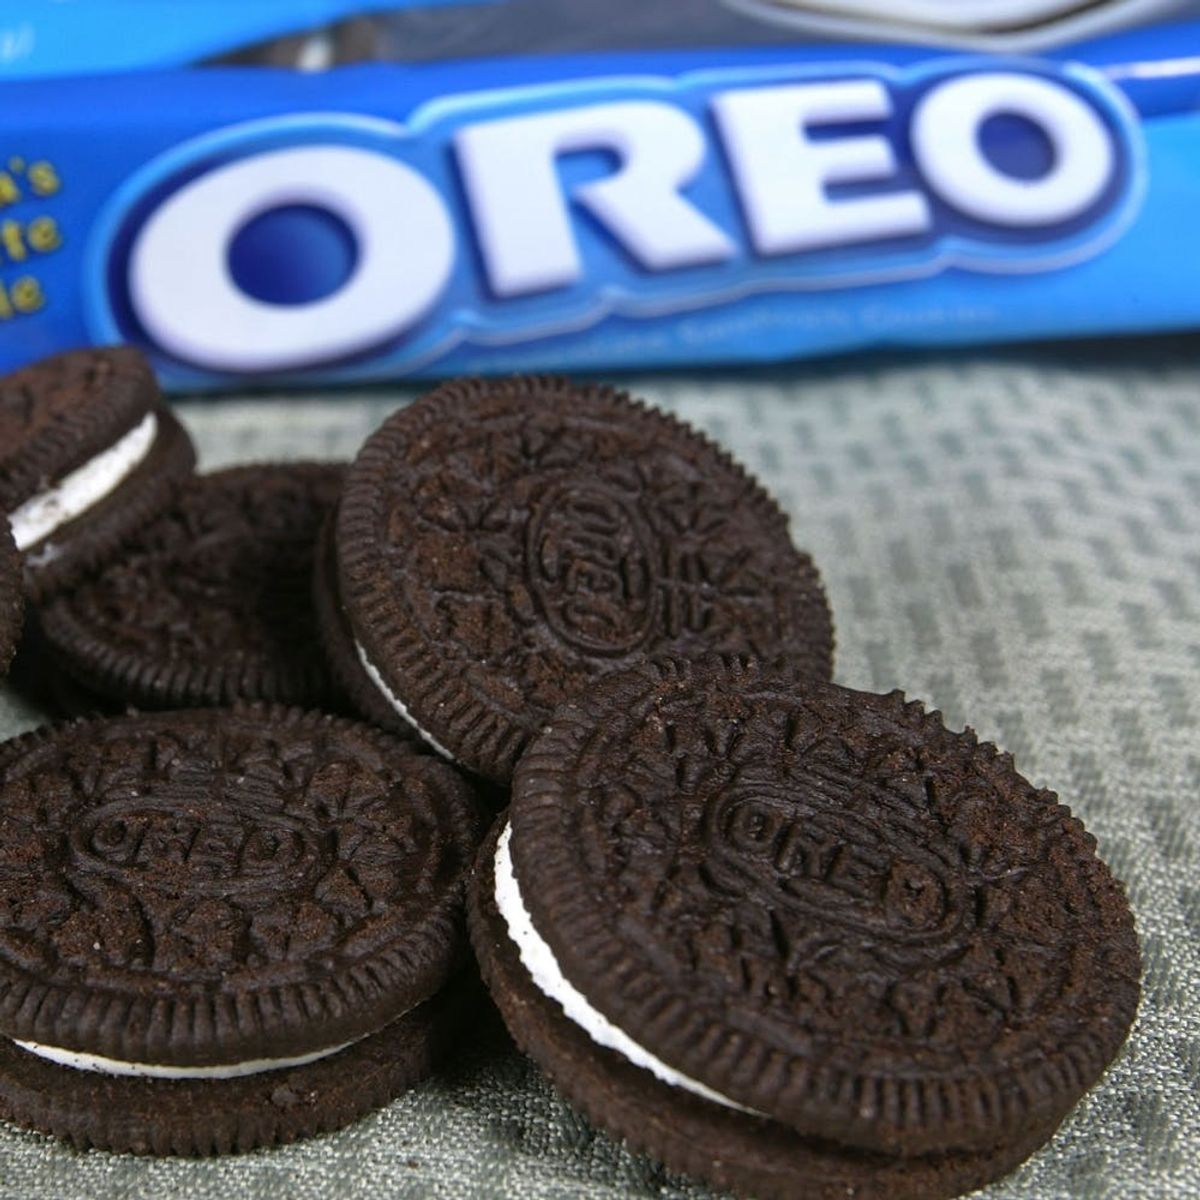 Oreo Has Done It Again With Two New Flavors That Will Have Your Mouth Watering